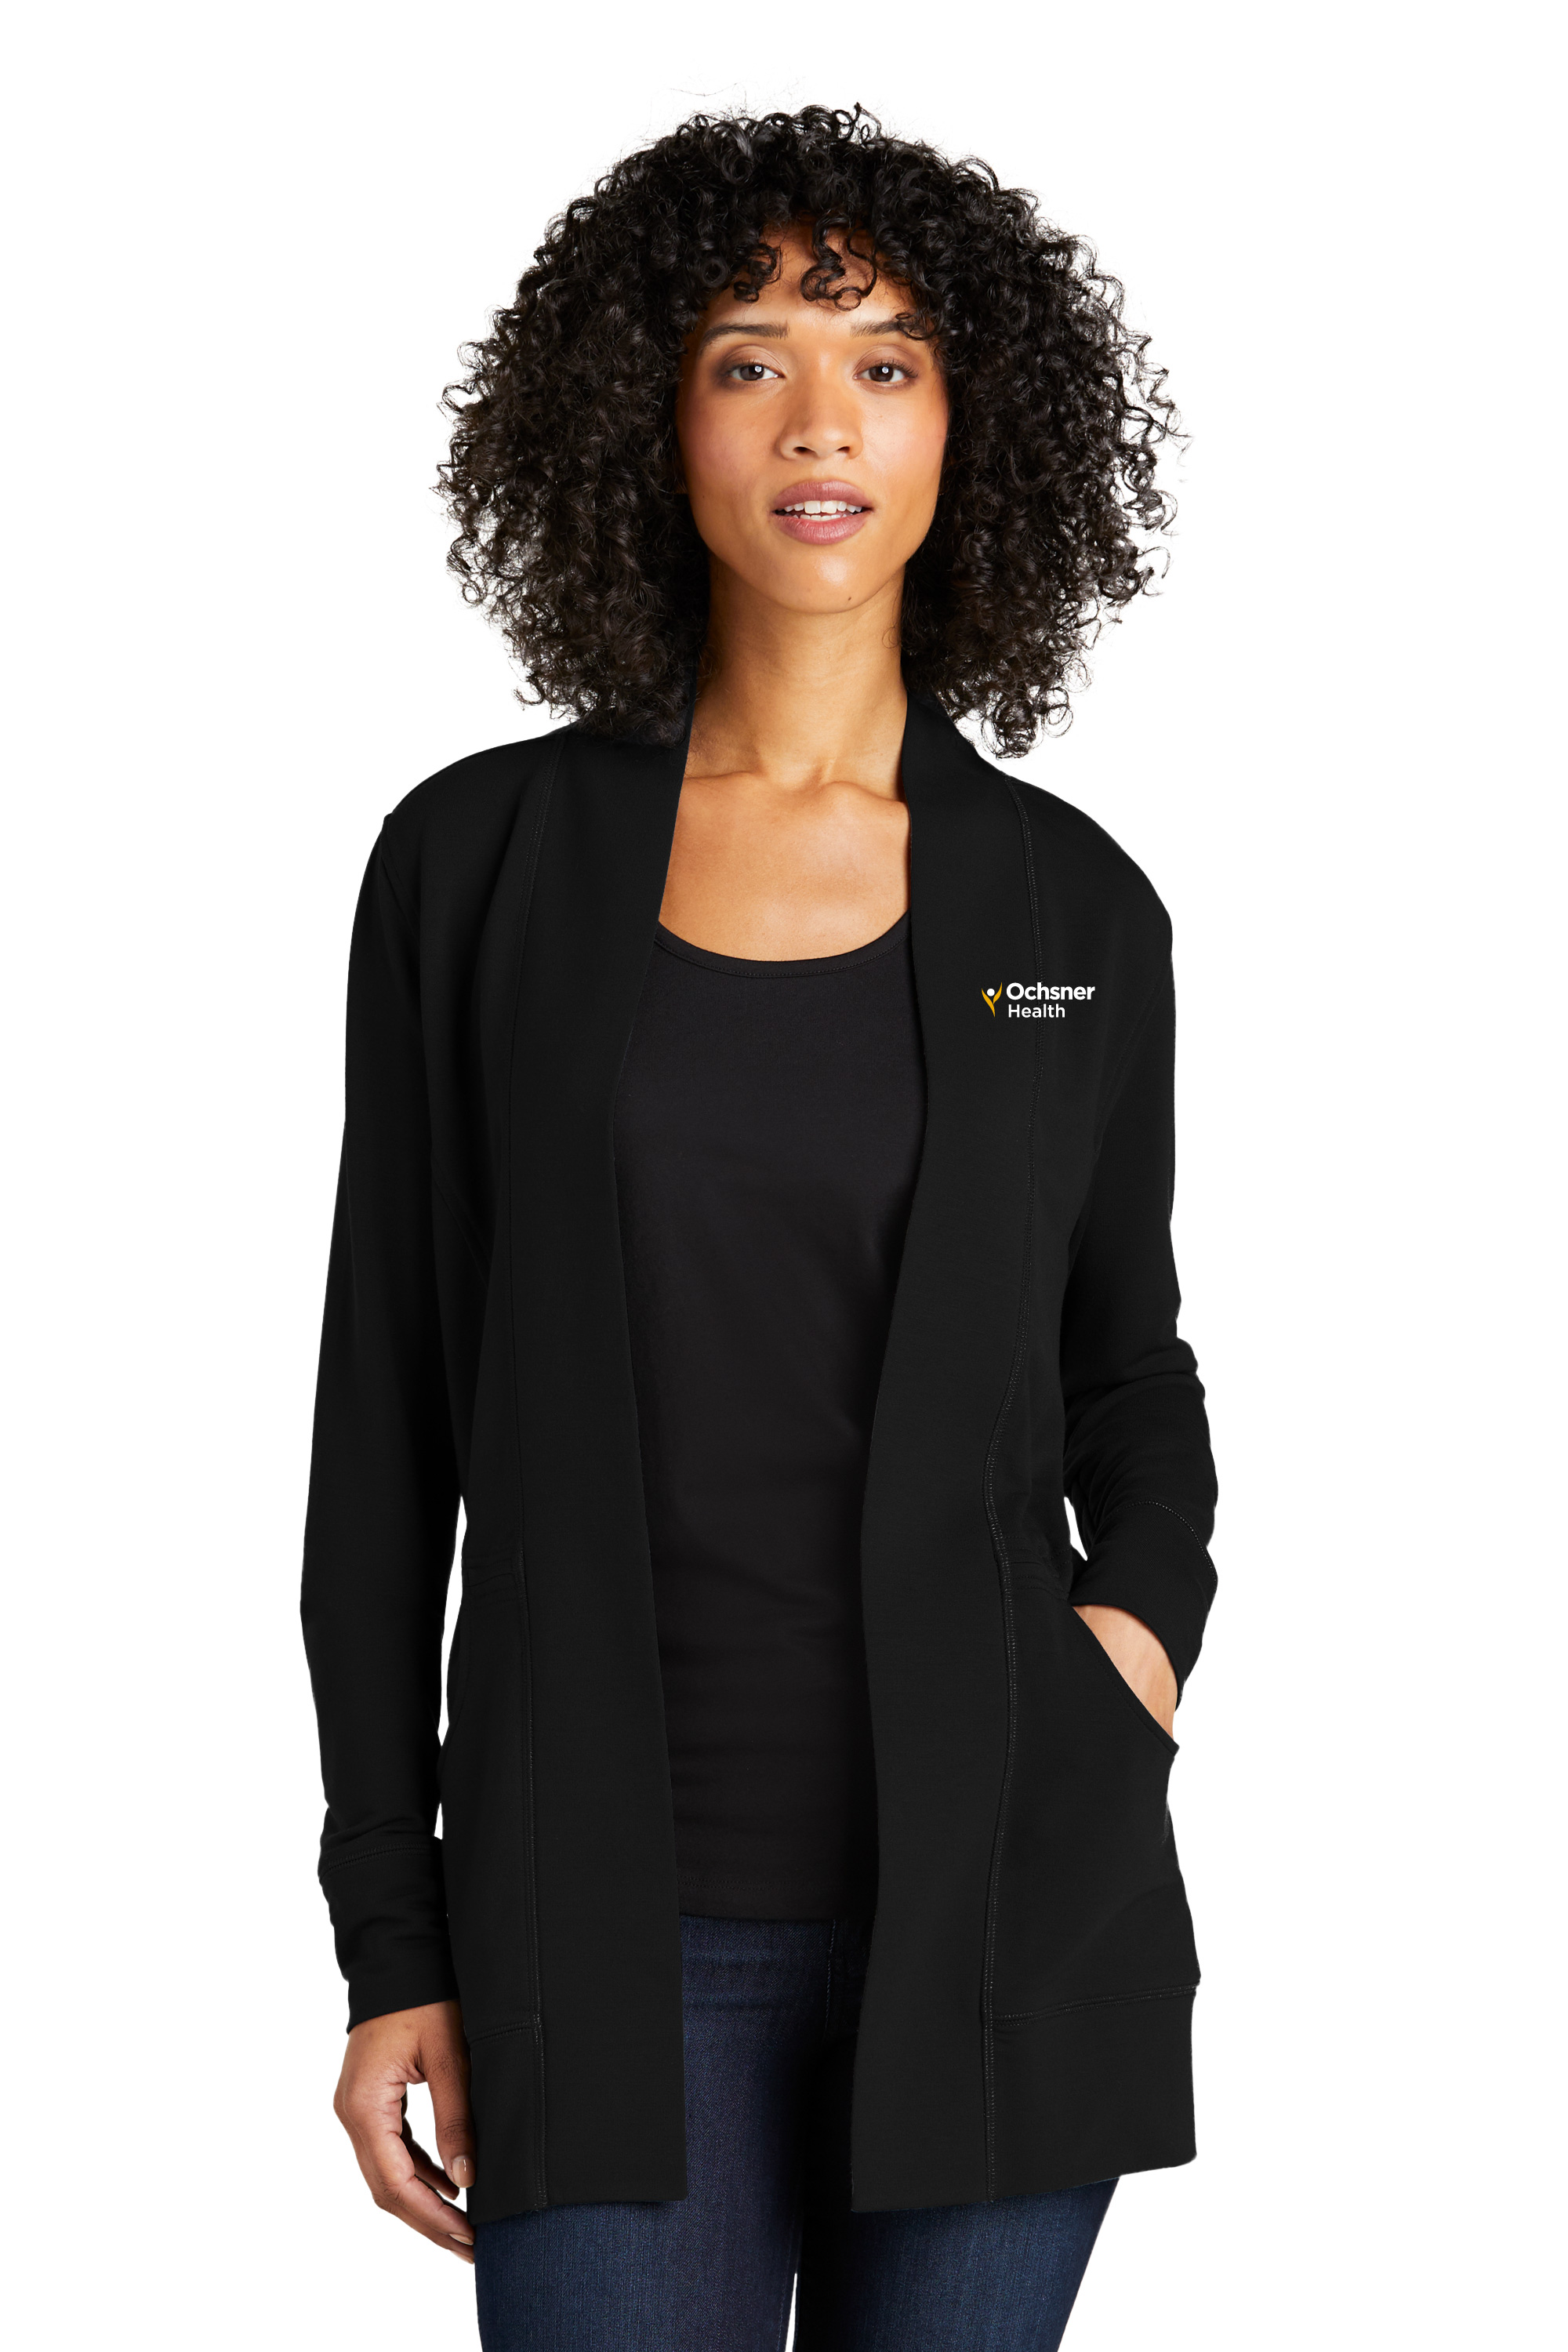 Microterry Cardigan, Black, large image number 1